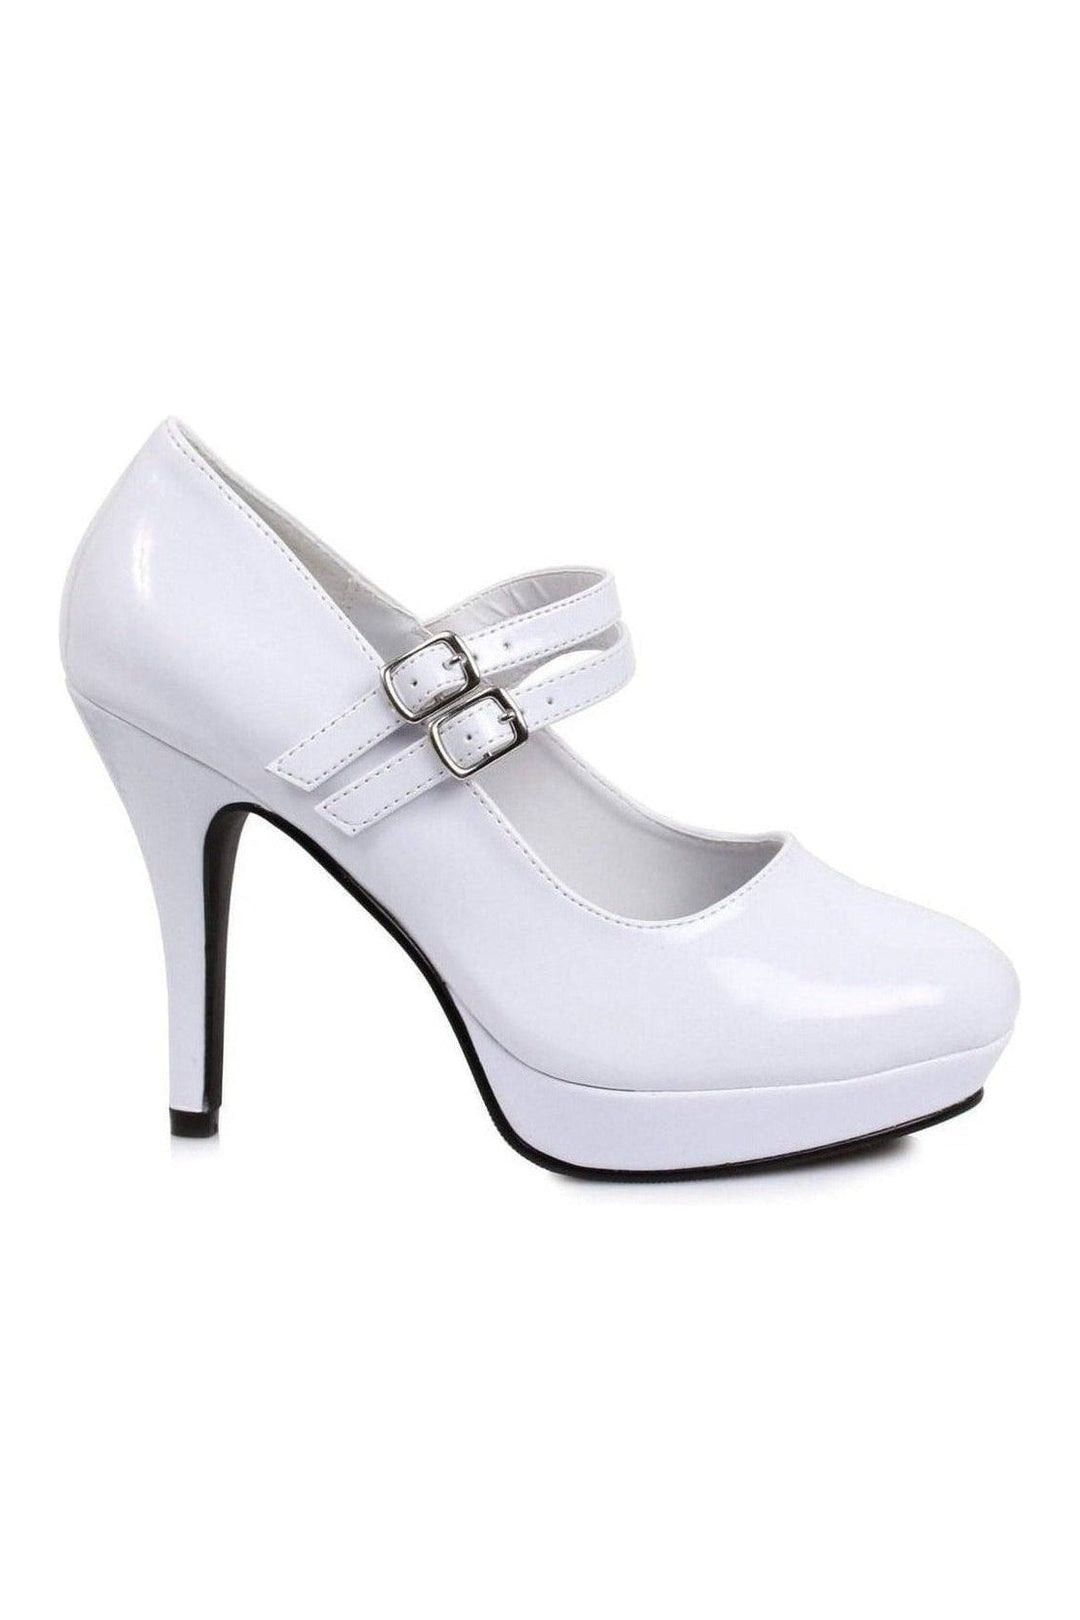 421-JANE Mary Jane | White Patent-Ellie Shoes-White-Mary Janes-SEXYSHOES.COM